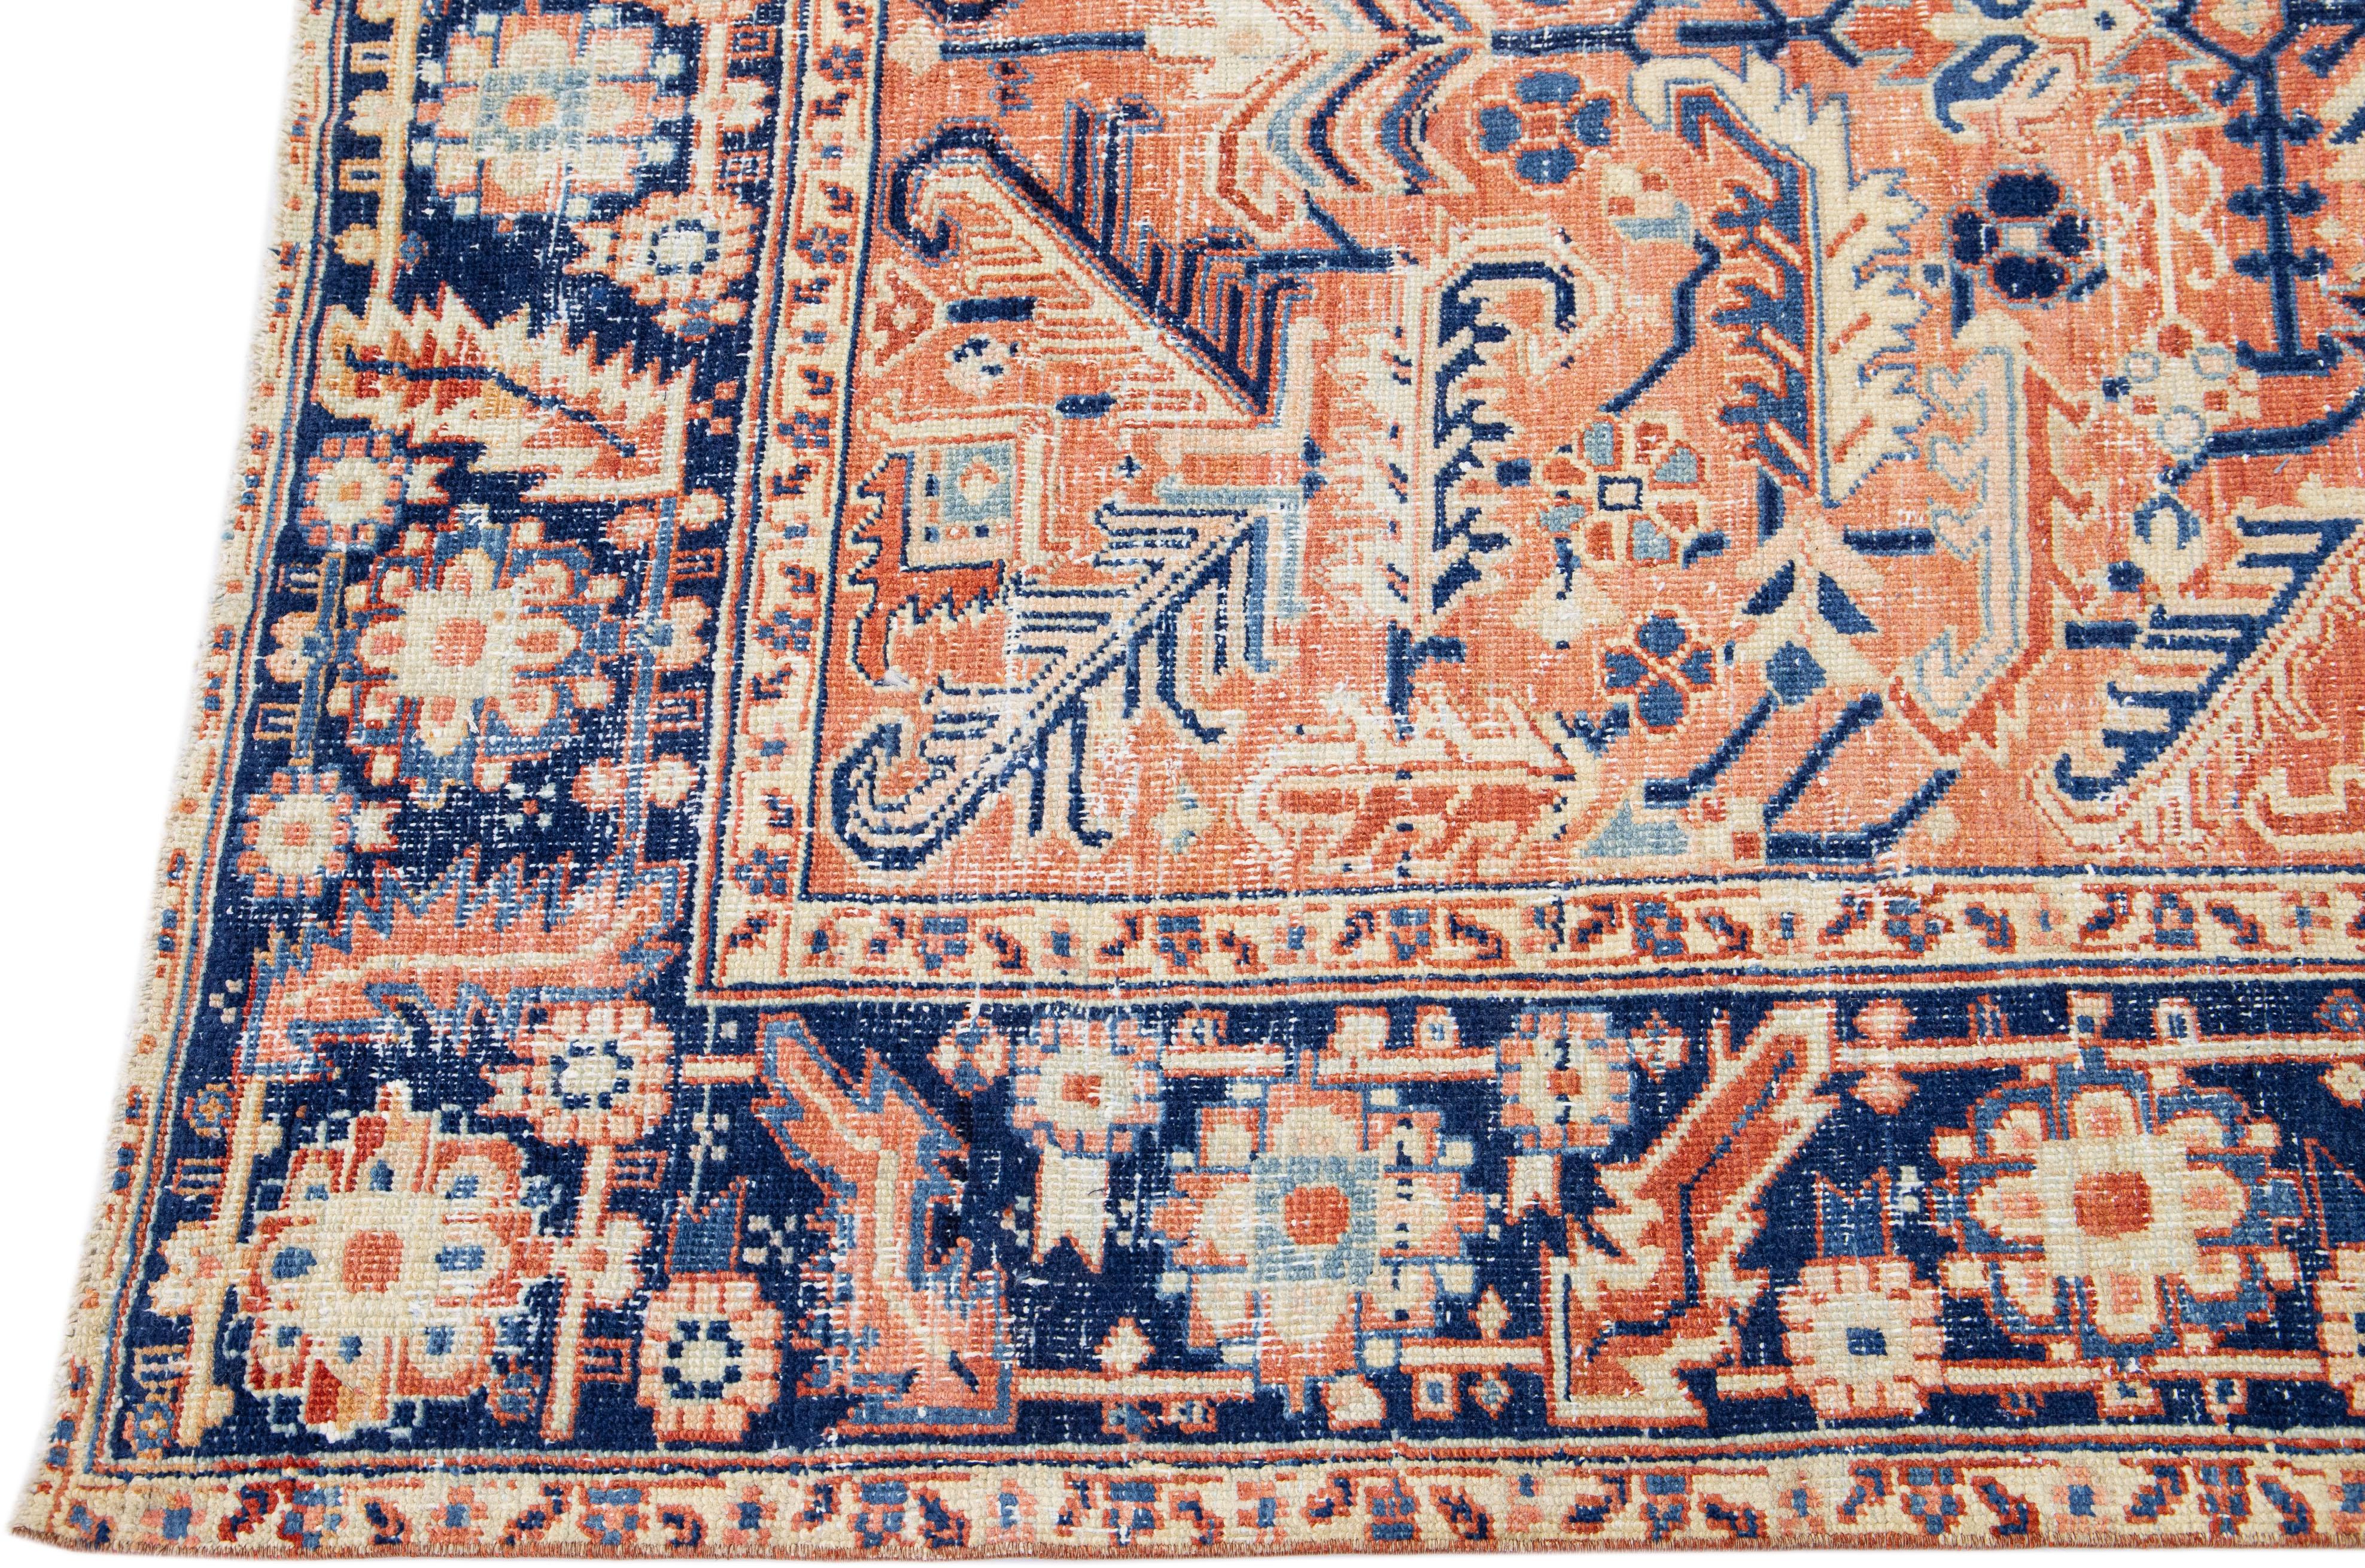 Antique Persian Heriz Peach Handmade Wool Rug with Medallion Design In Good Condition For Sale In Norwalk, CT